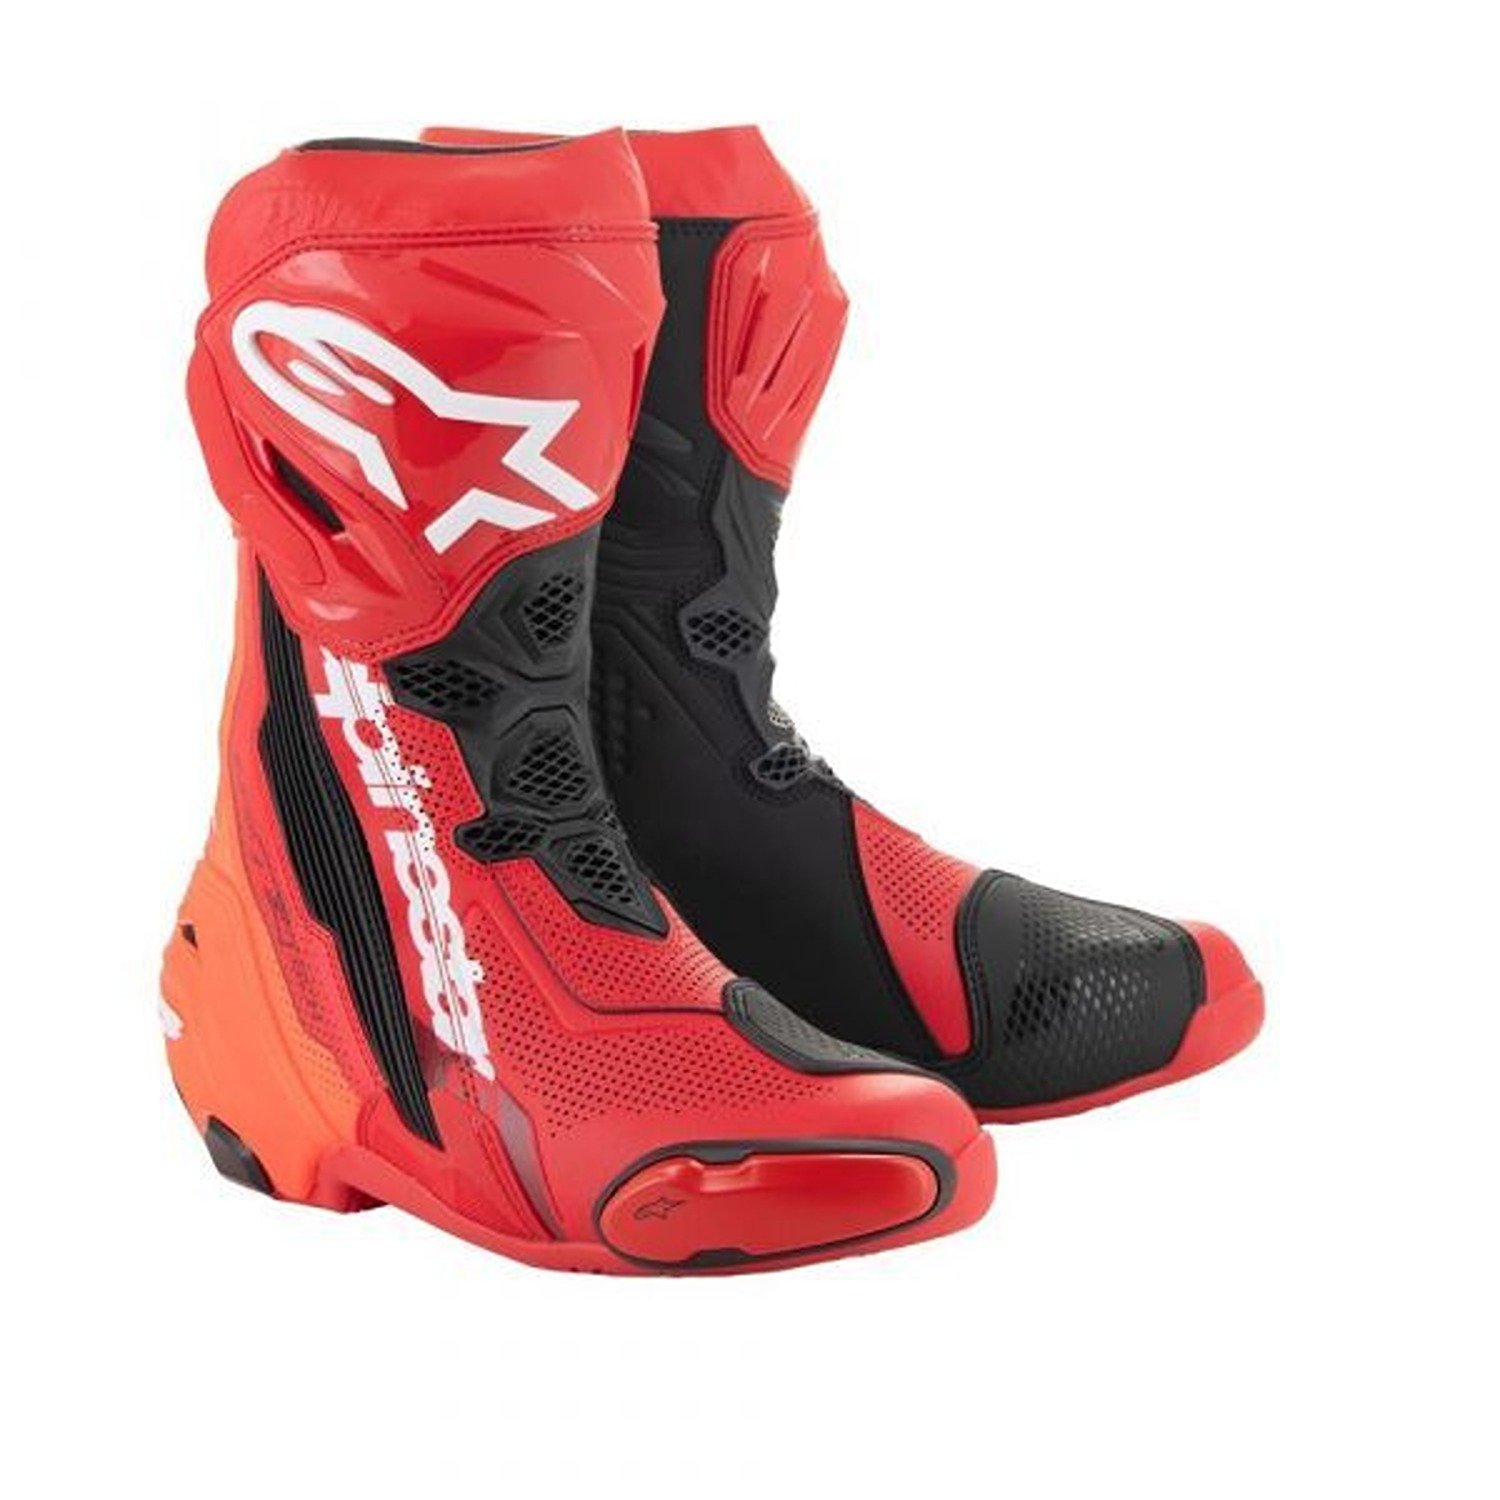 Image of Alpinestars Supertech R Vented Boots Bright Red Red Fluo Taille 46